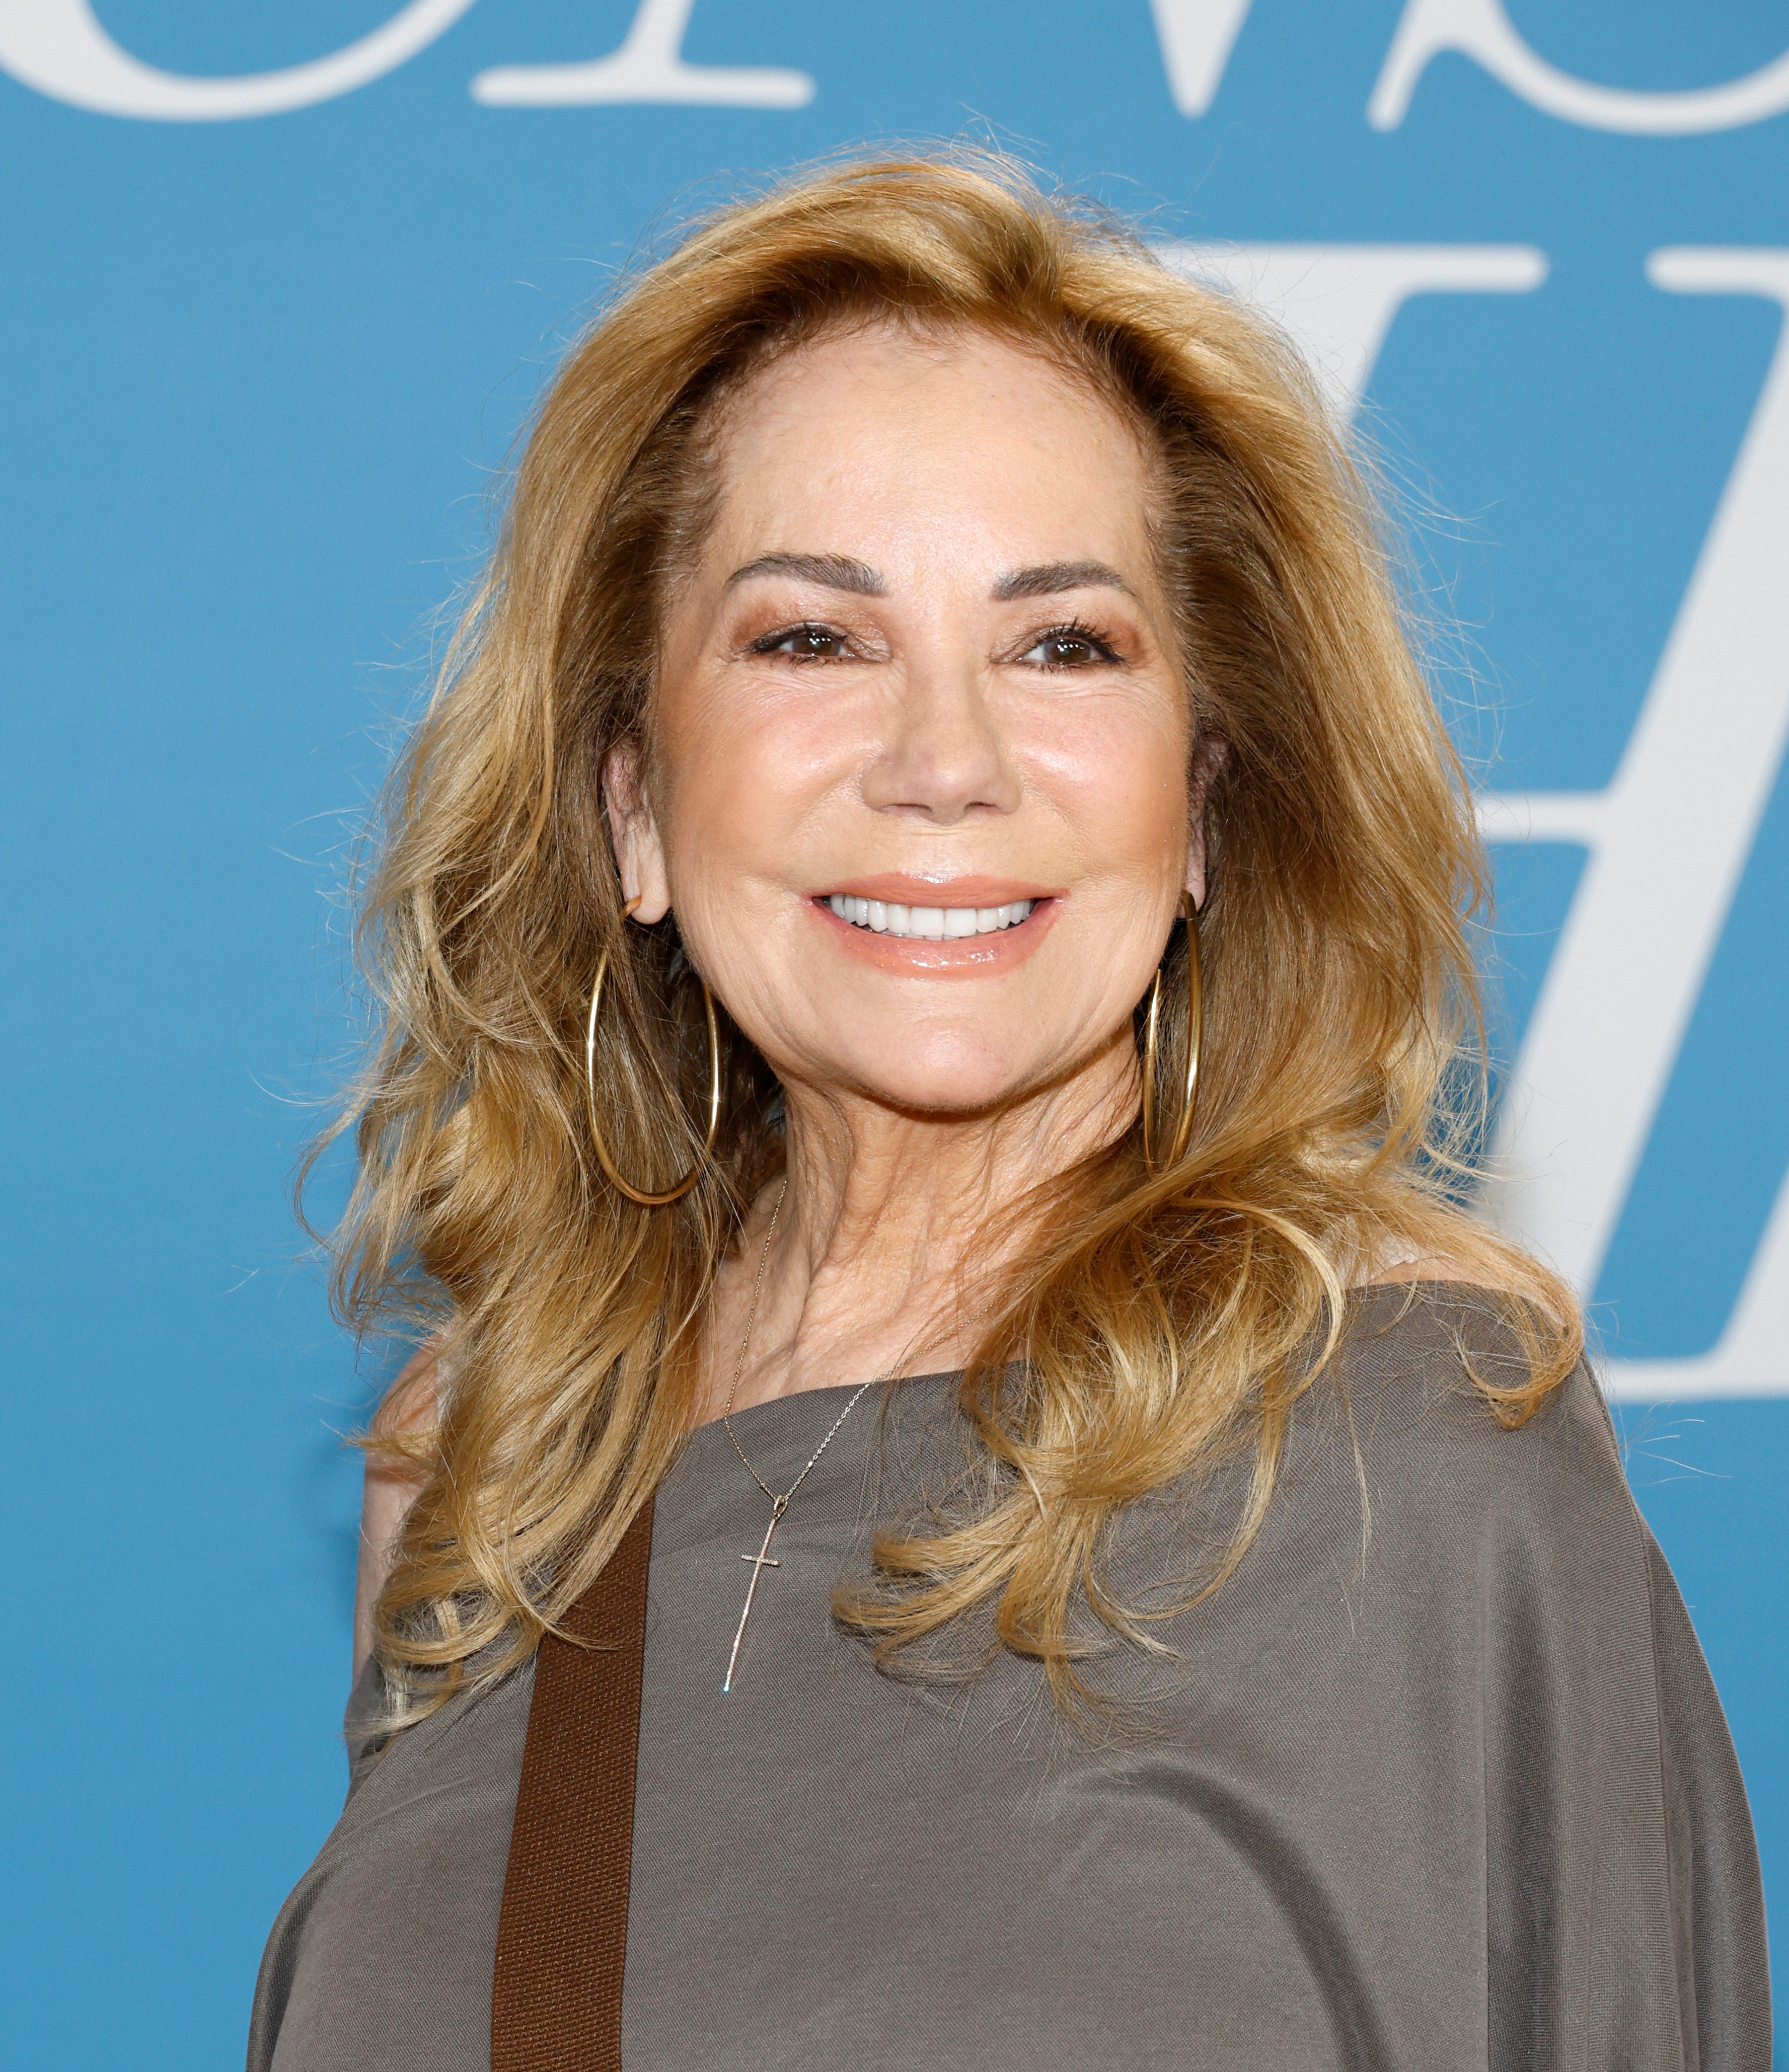 Kathie Lee Gifford reveals she's recovering from 'painful' hip replacement surgery